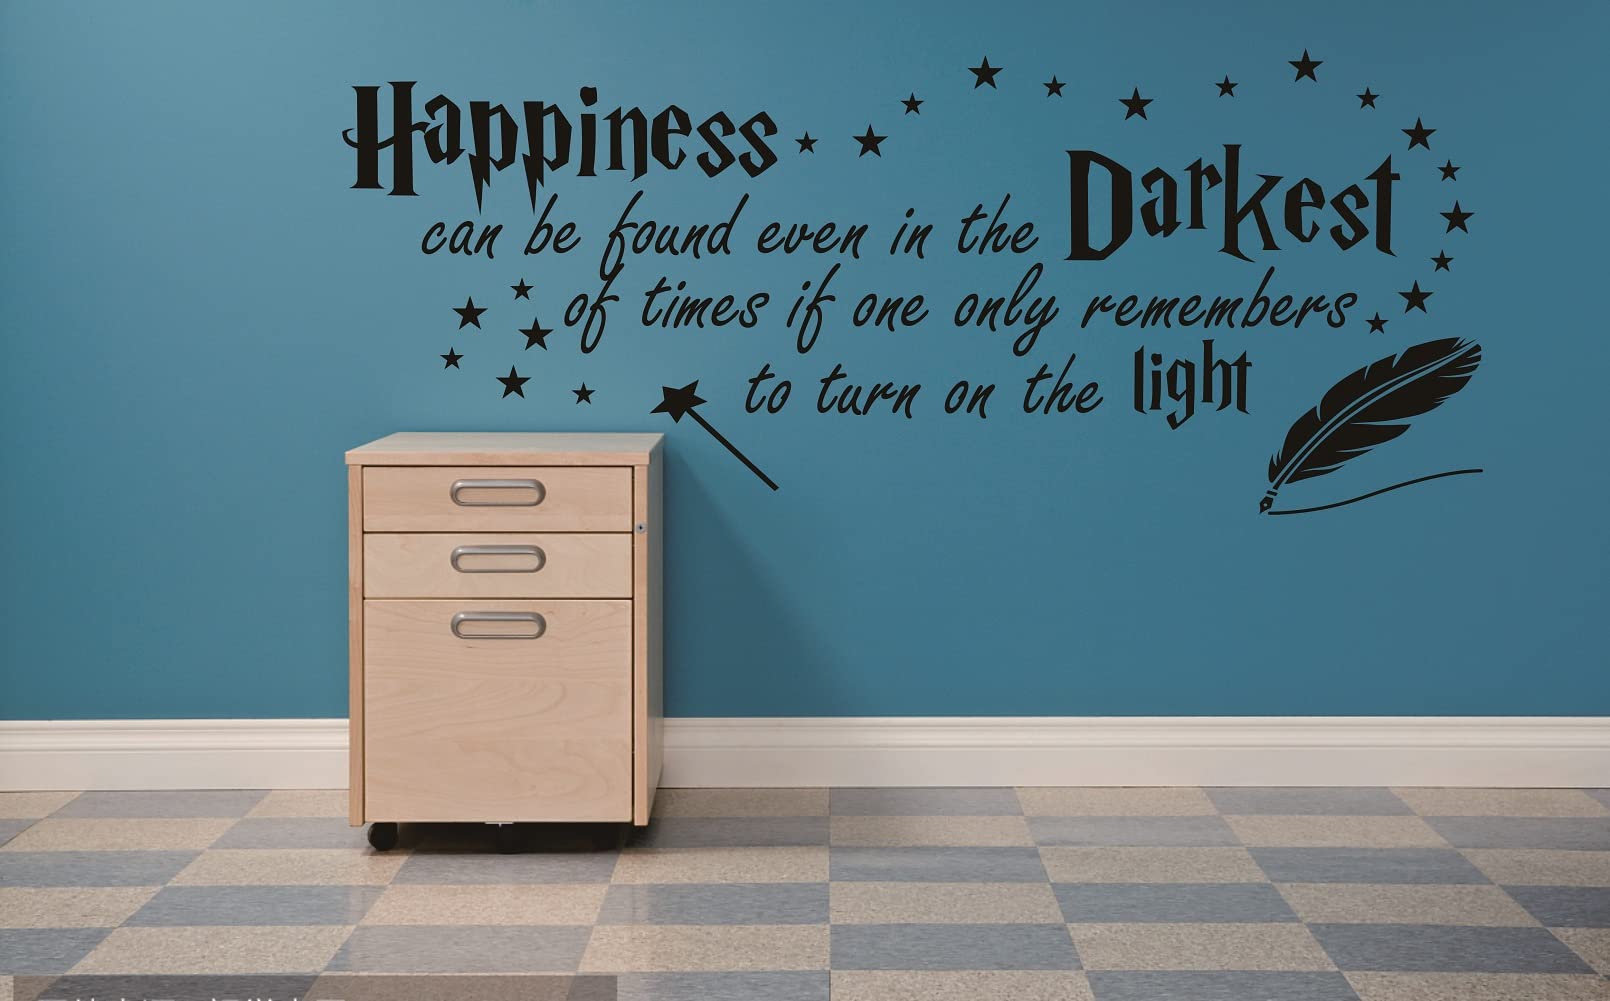 Quote Happiness can be Found Even in The Darkest Wall Sticker Decor Nursery Decal for Kid’s Room